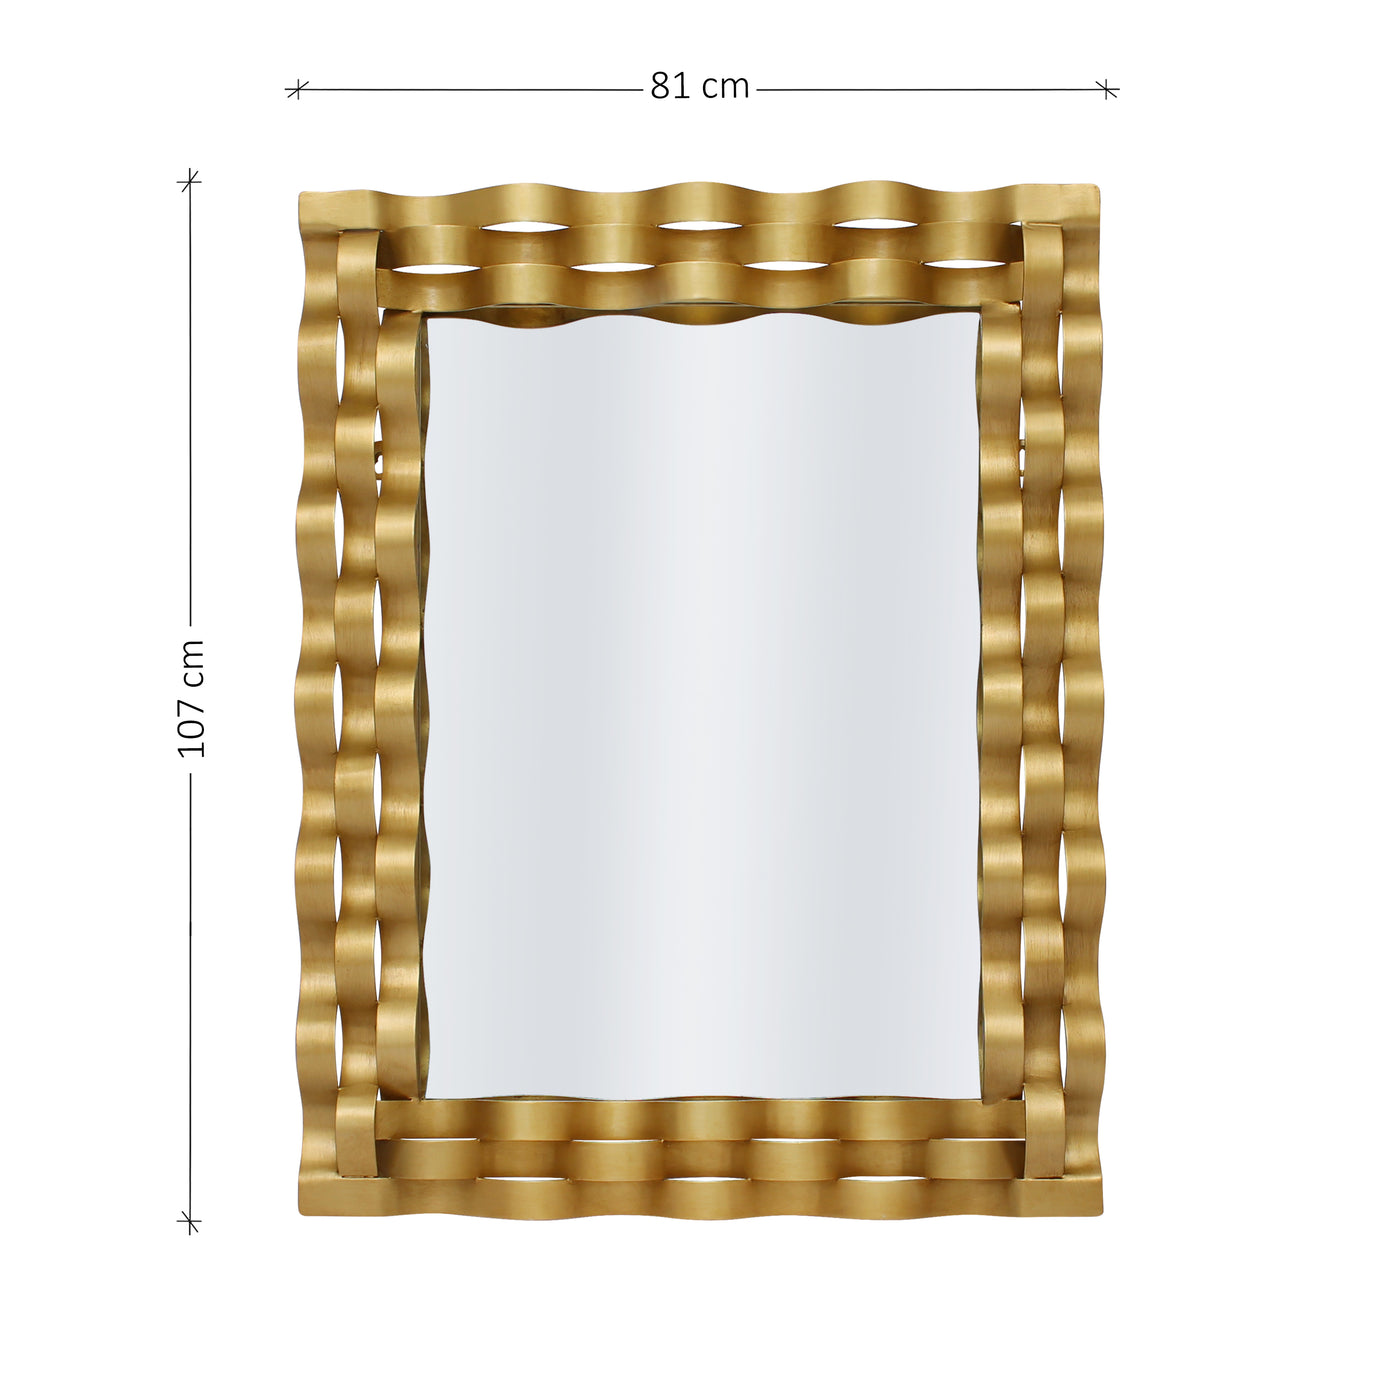 A rectangular golden mirror with wavy strips made of metal wrapped along its border; with annotated dimensions